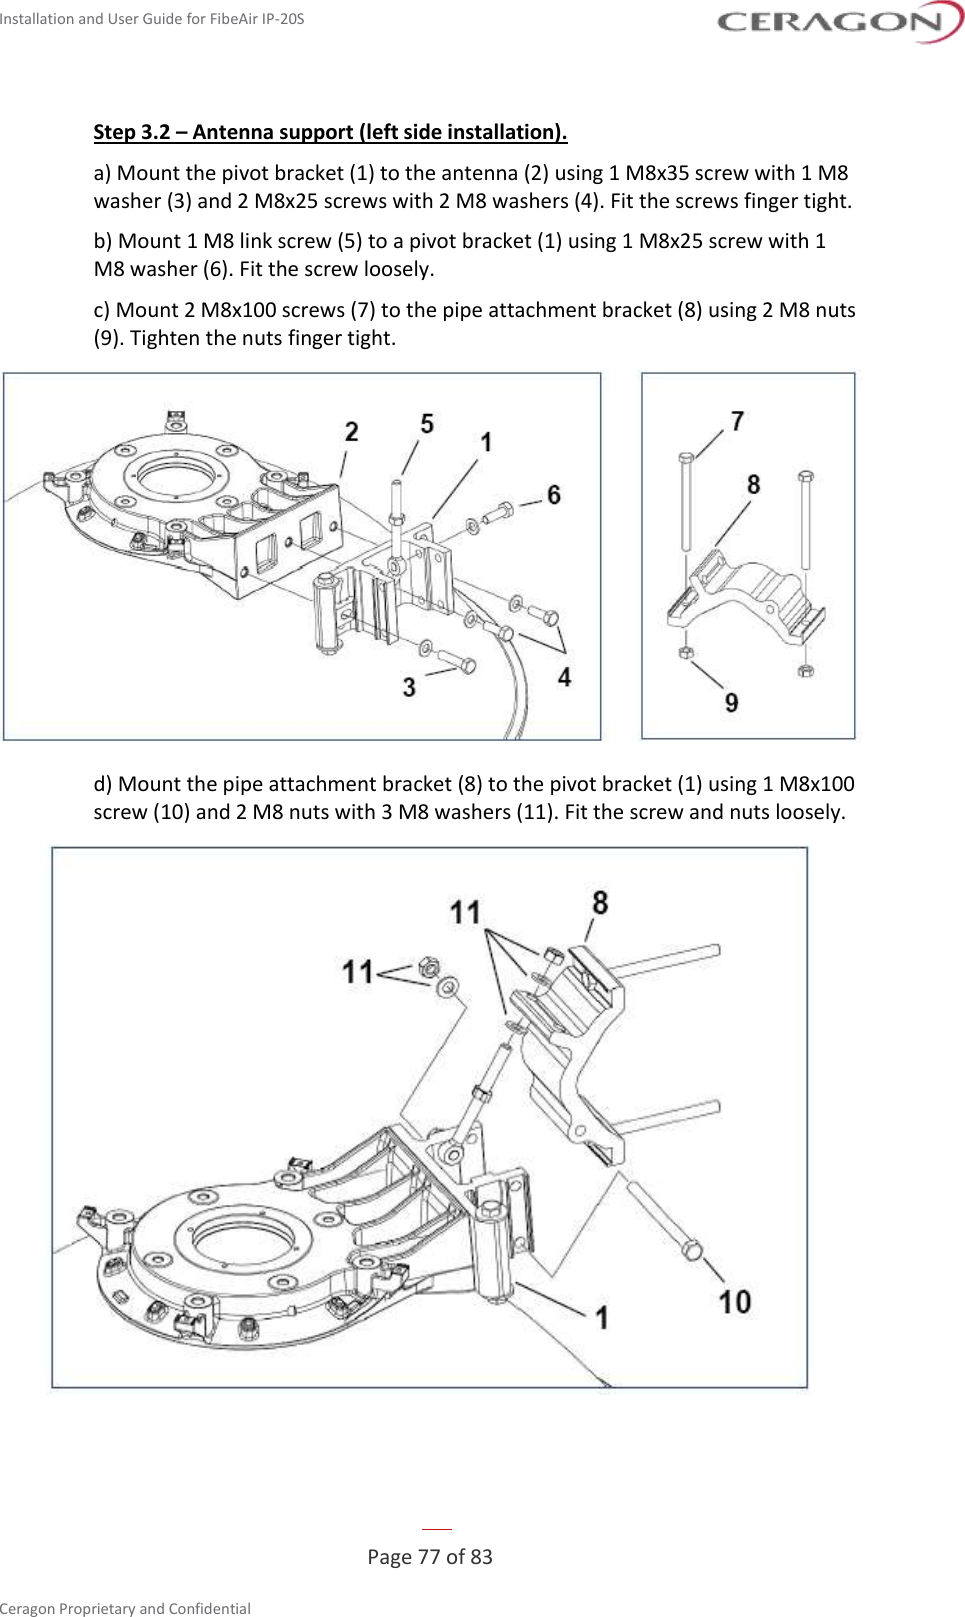 Installation and User Guide for FibeAir IP-20S   Page 77 of 83  Ceragon Proprietary and Confidential     Step 3.2 – Antenna support (left side installation). a) Mount the pivot bracket (1) to the antenna (2) using 1 M8x35 screw with 1 M8 washer (3) and 2 M8x25 screws with 2 M8 washers (4). Fit the screws finger tight. b) Mount 1 M8 link screw (5) to a pivot bracket (1) using 1 M8x25 screw with 1 M8 washer (6). Fit the screw loosely. c) Mount 2 M8x100 screws (7) to the pipe attachment bracket (8) using 2 M8 nuts (9). Tighten the nuts finger tight.  d) Mount the pipe attachment bracket (8) to the pivot bracket (1) using 1 M8x100 screw (10) and 2 M8 nuts with 3 M8 washers (11). Fit the screw and nuts loosely.  